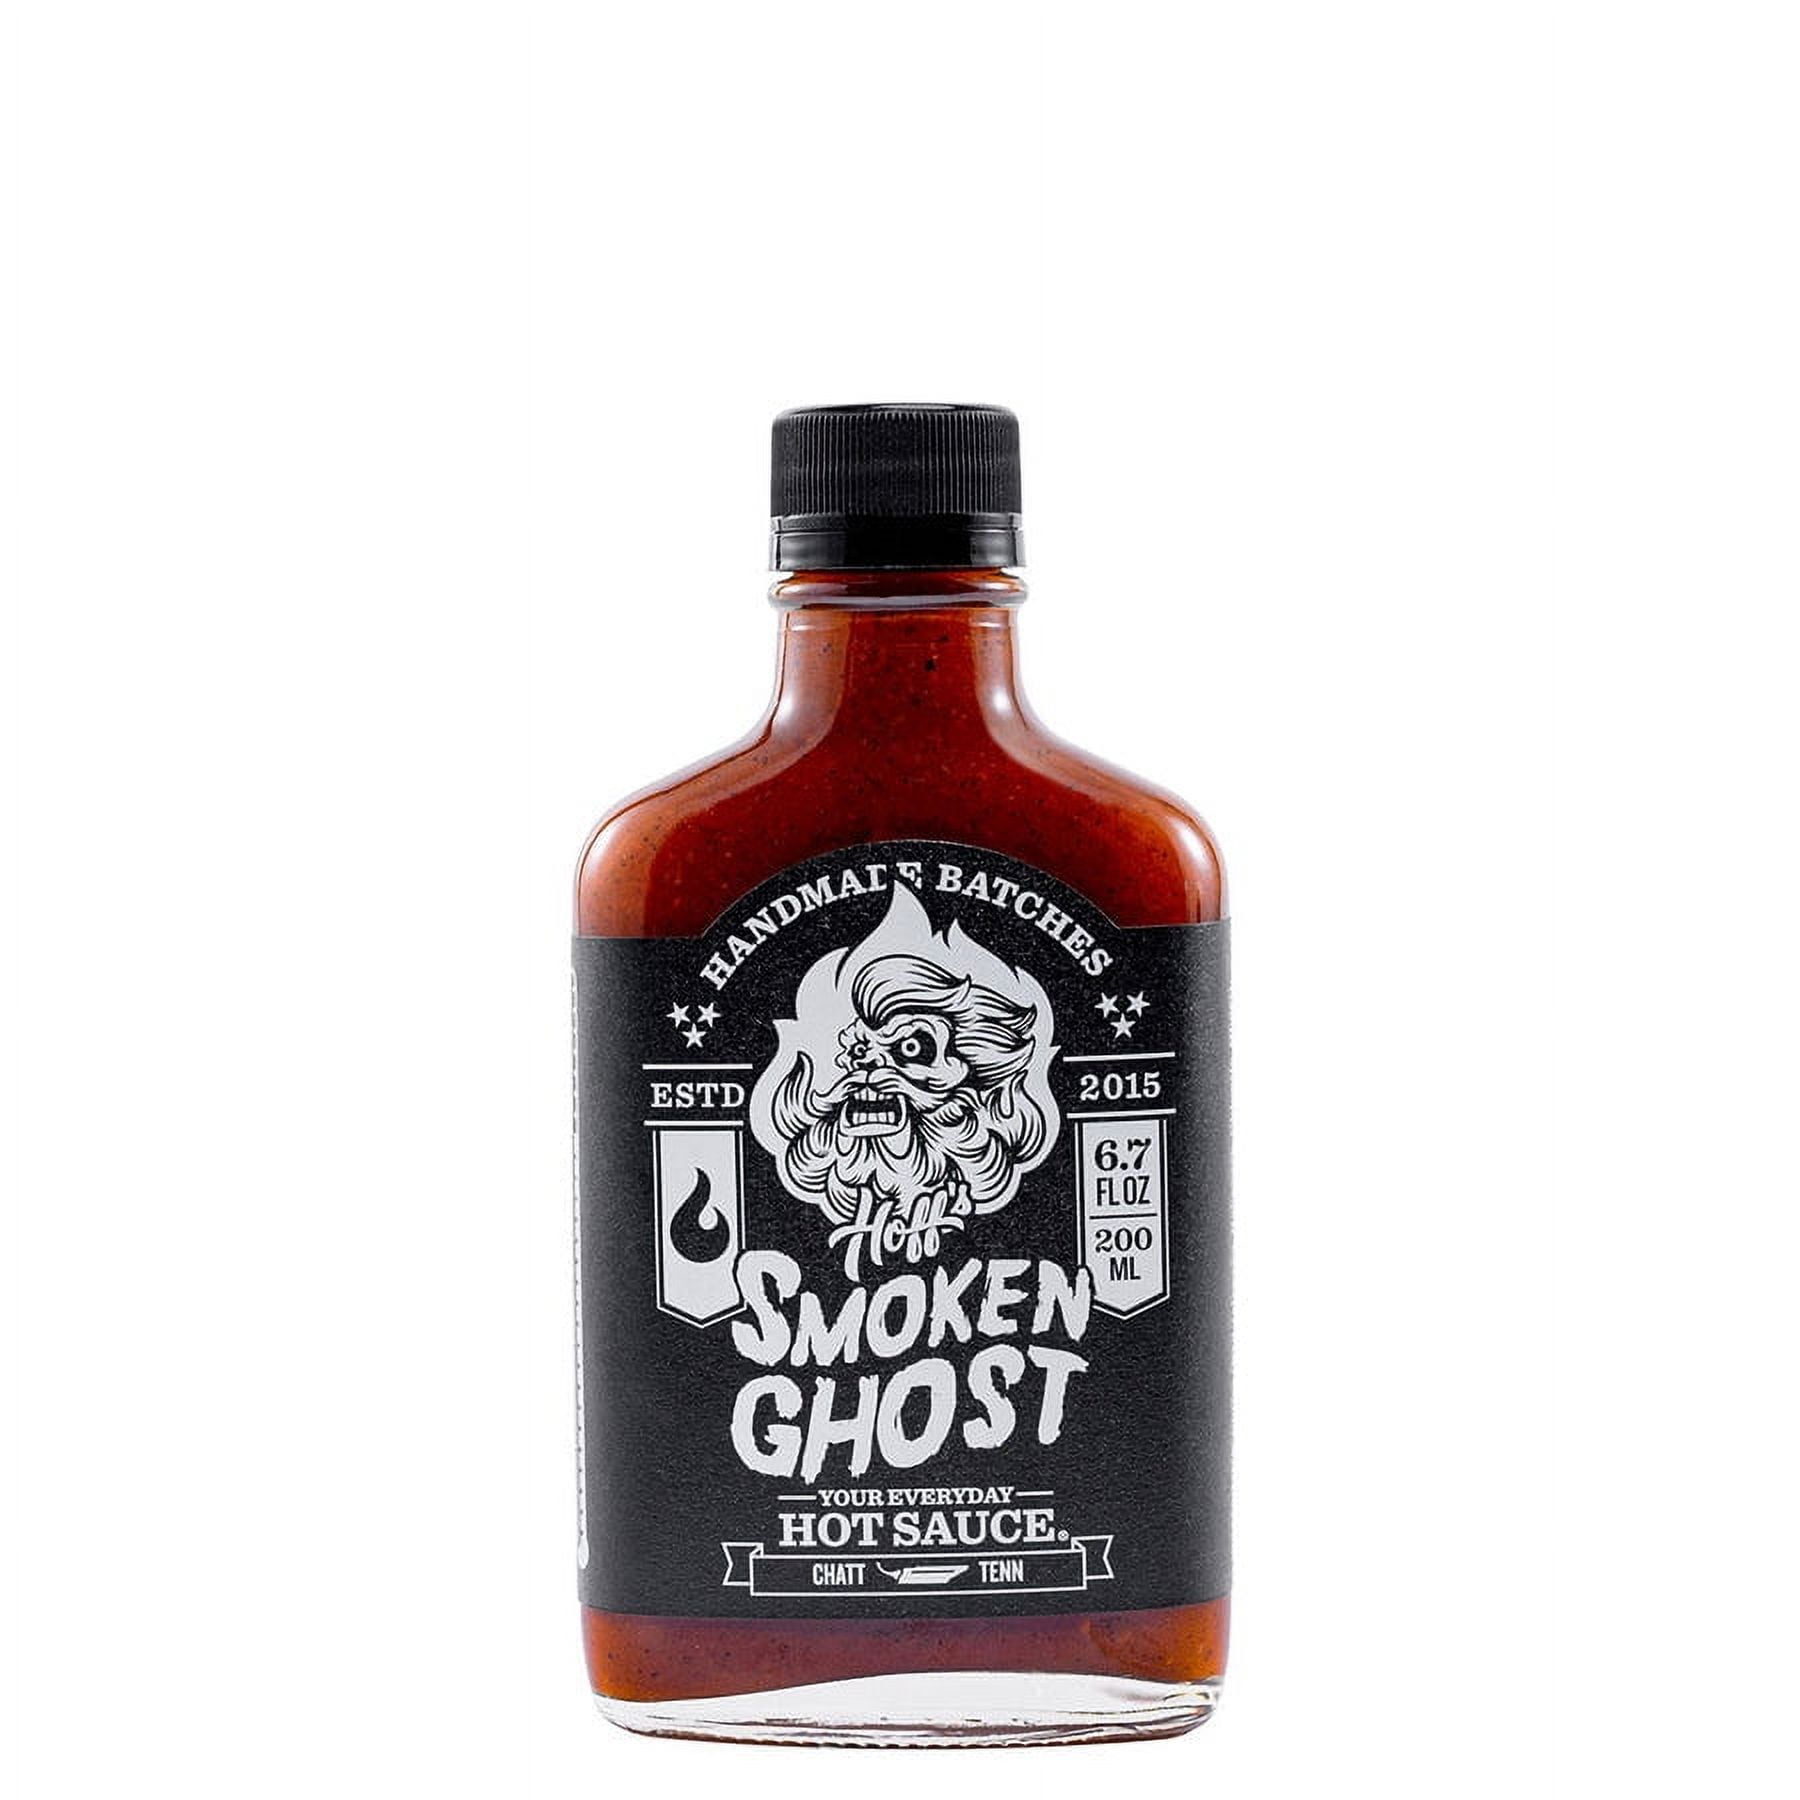 Picture of Hoff & Pepper 9014707 6.7 oz Smoken Ghost Hot Sauce